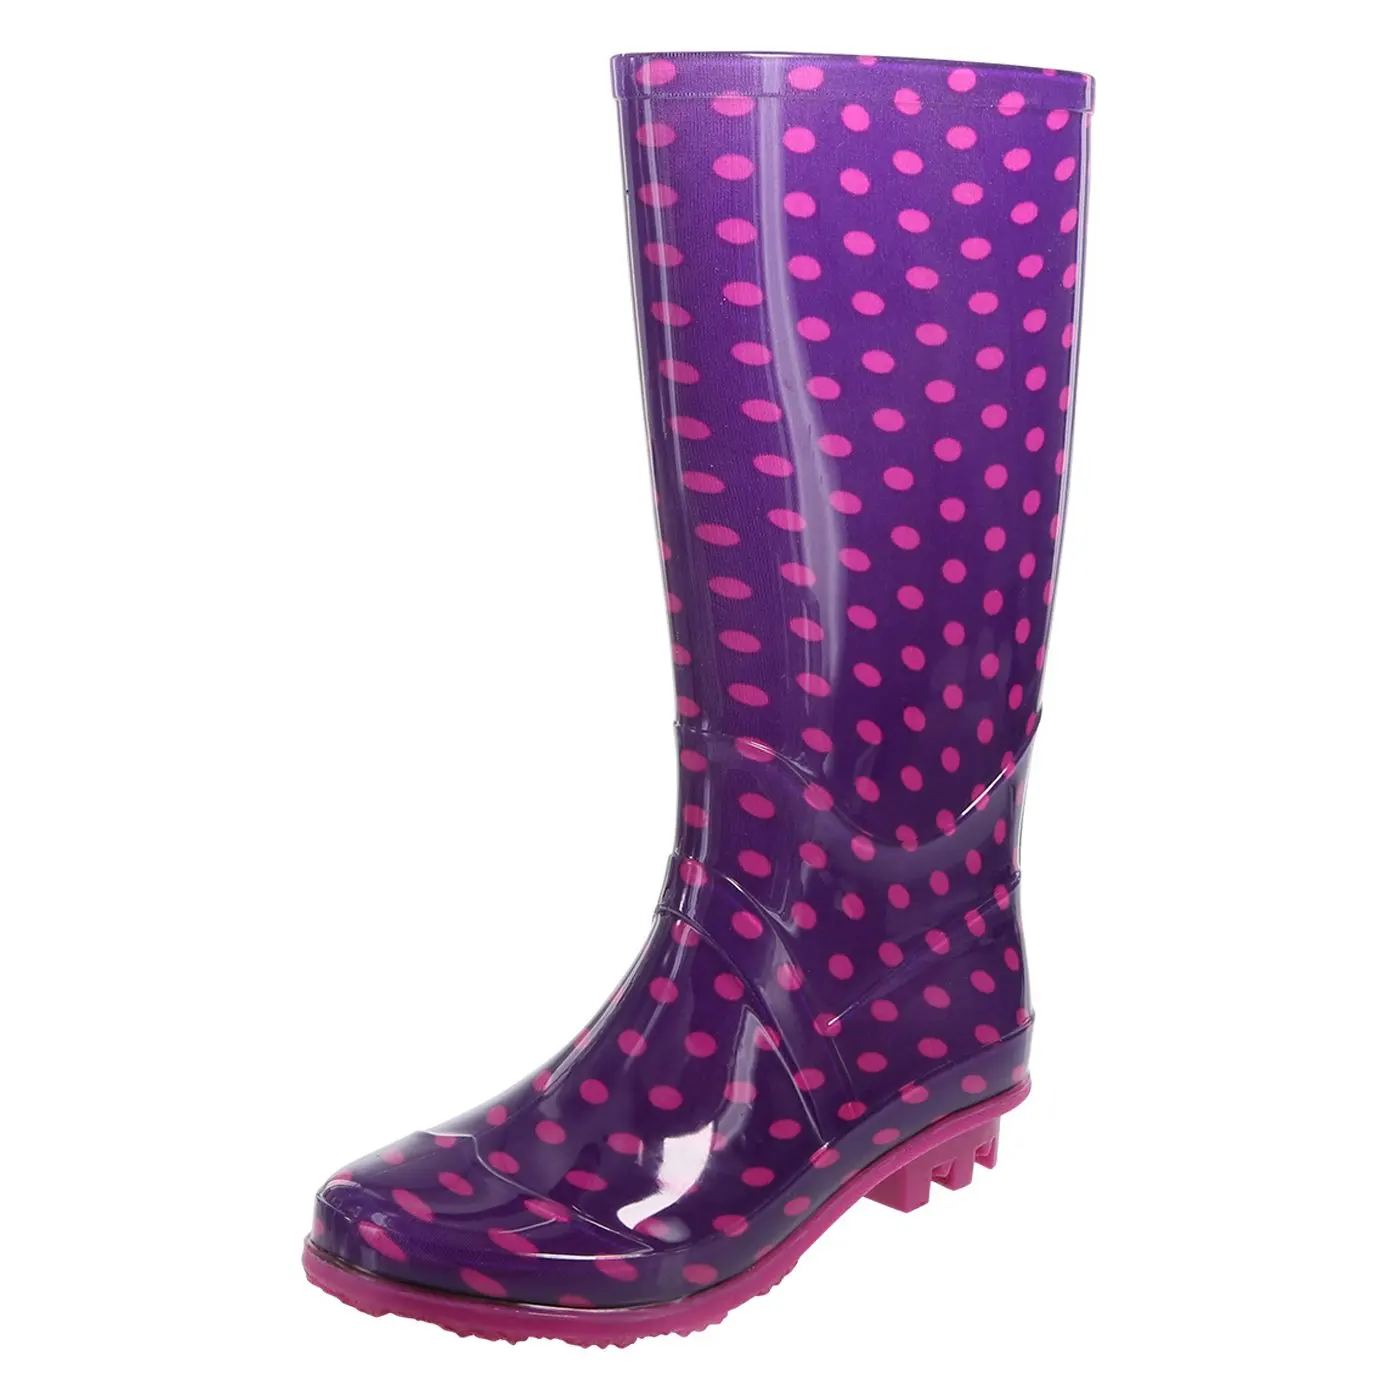 rugged outback rain boots